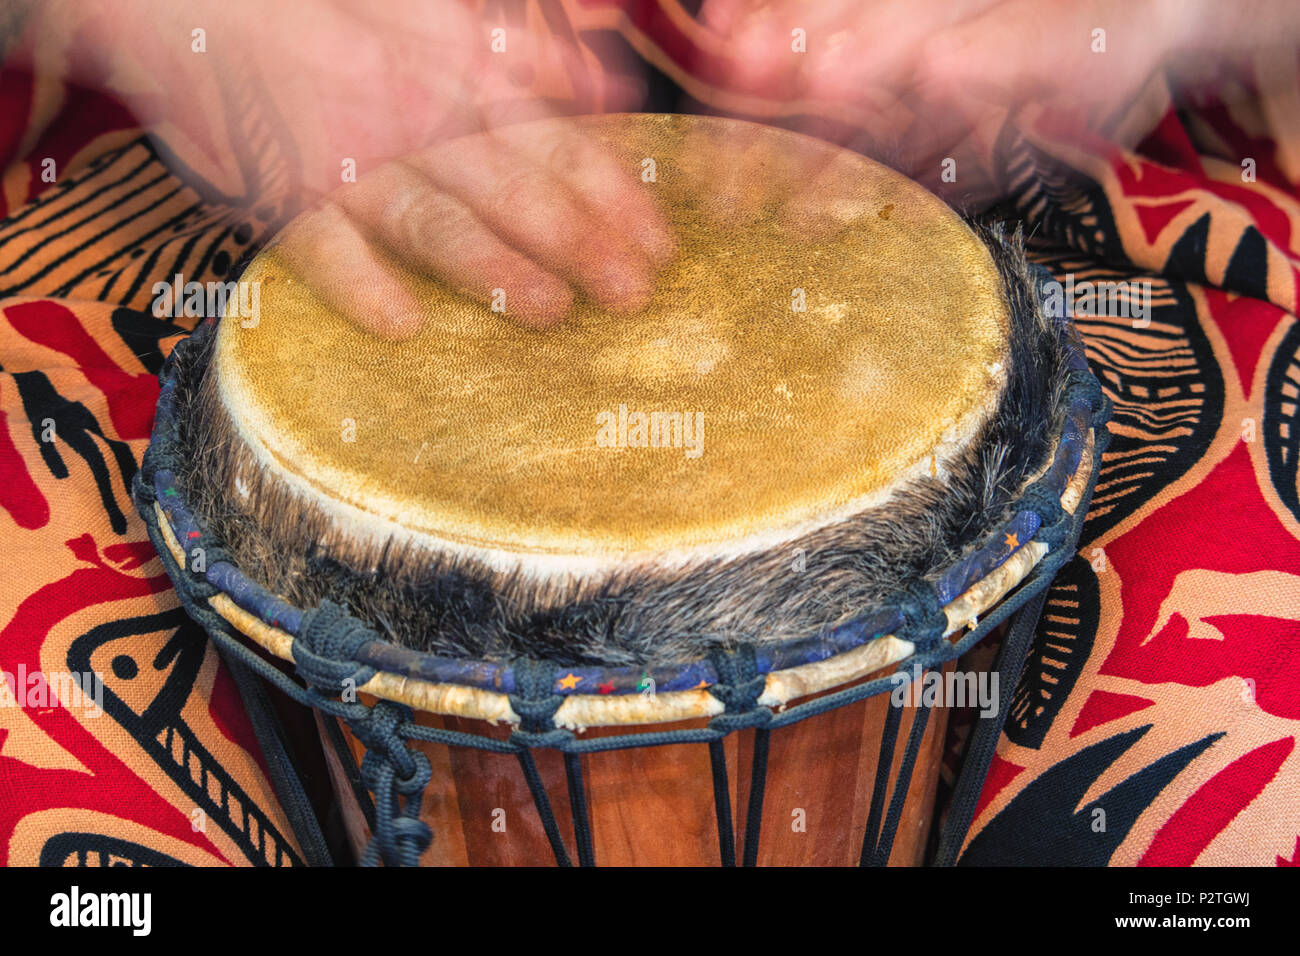 capturing motion of someone drumming on an ethnic drum Stock Photo